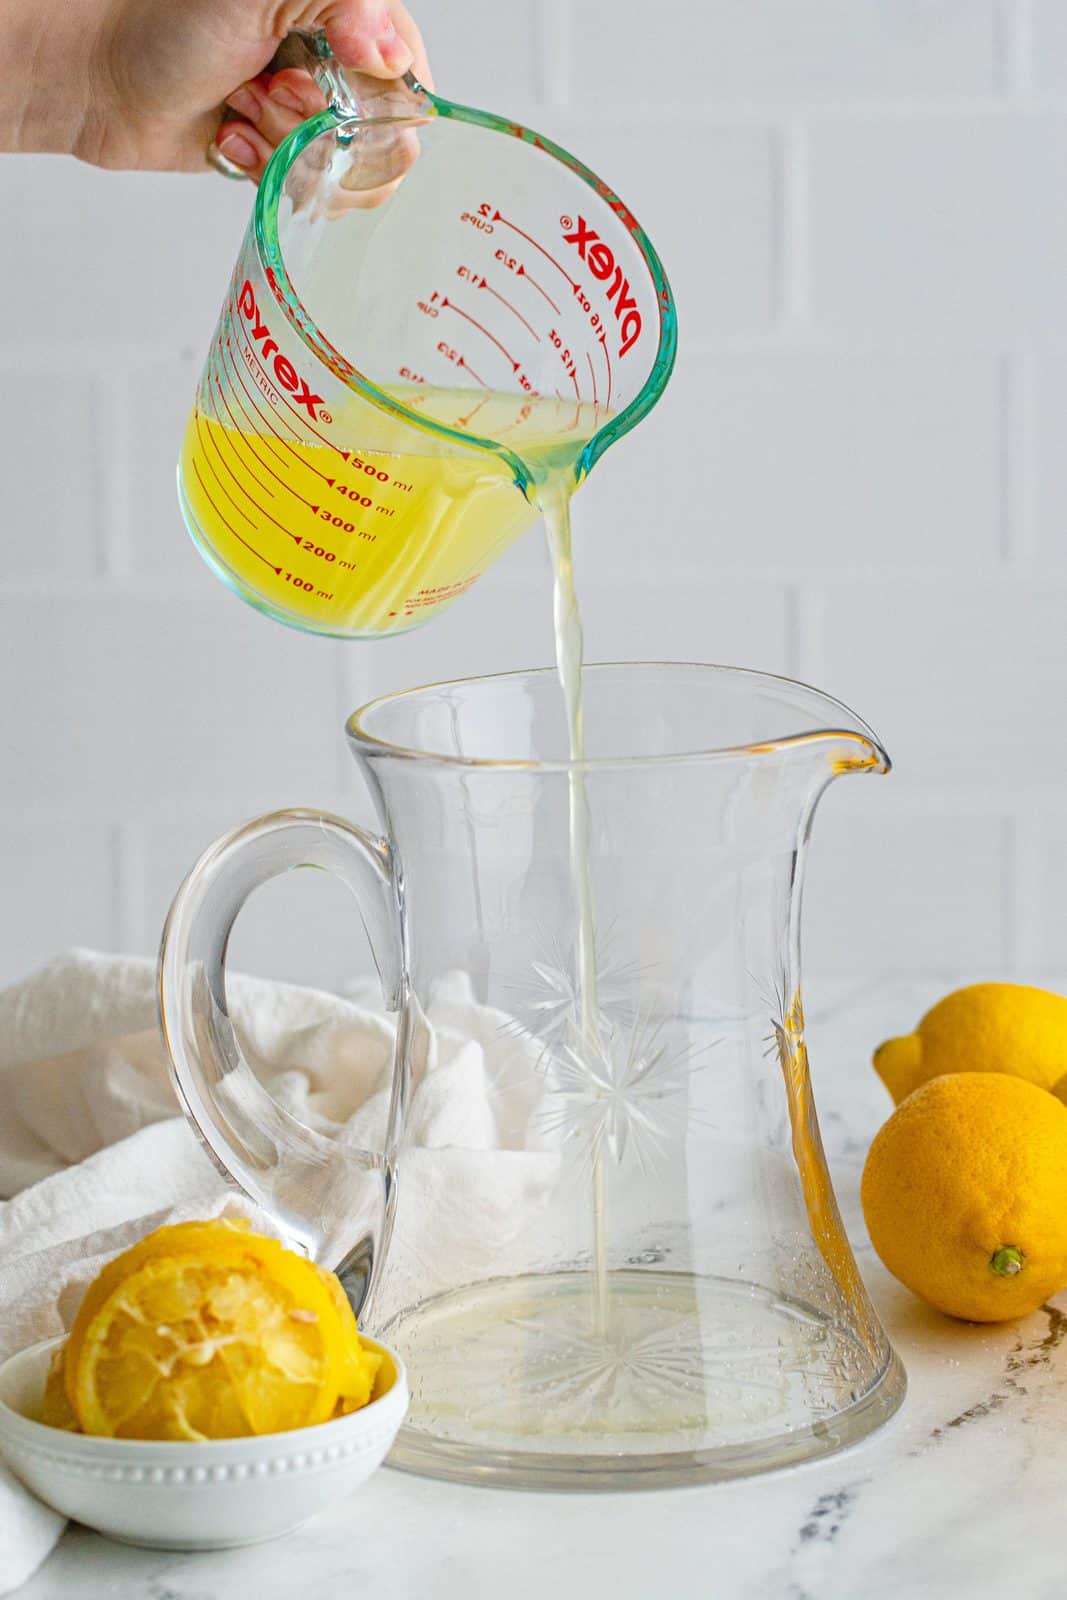 Lemon juice being poured into pitcher.